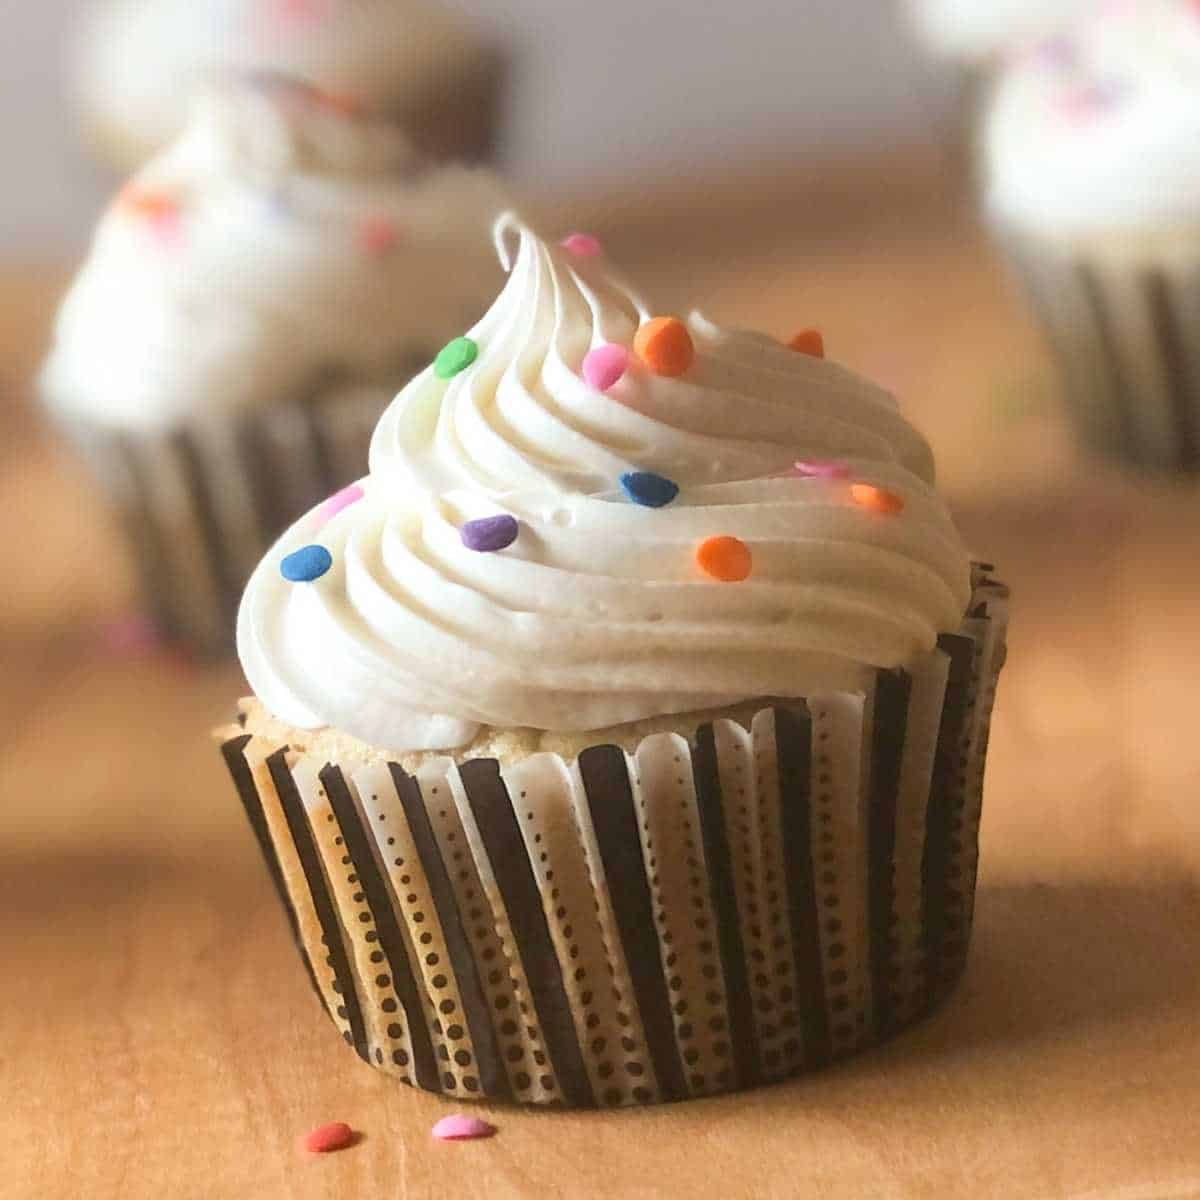 A cupcake topped with vanilla frosting and sprinkles.